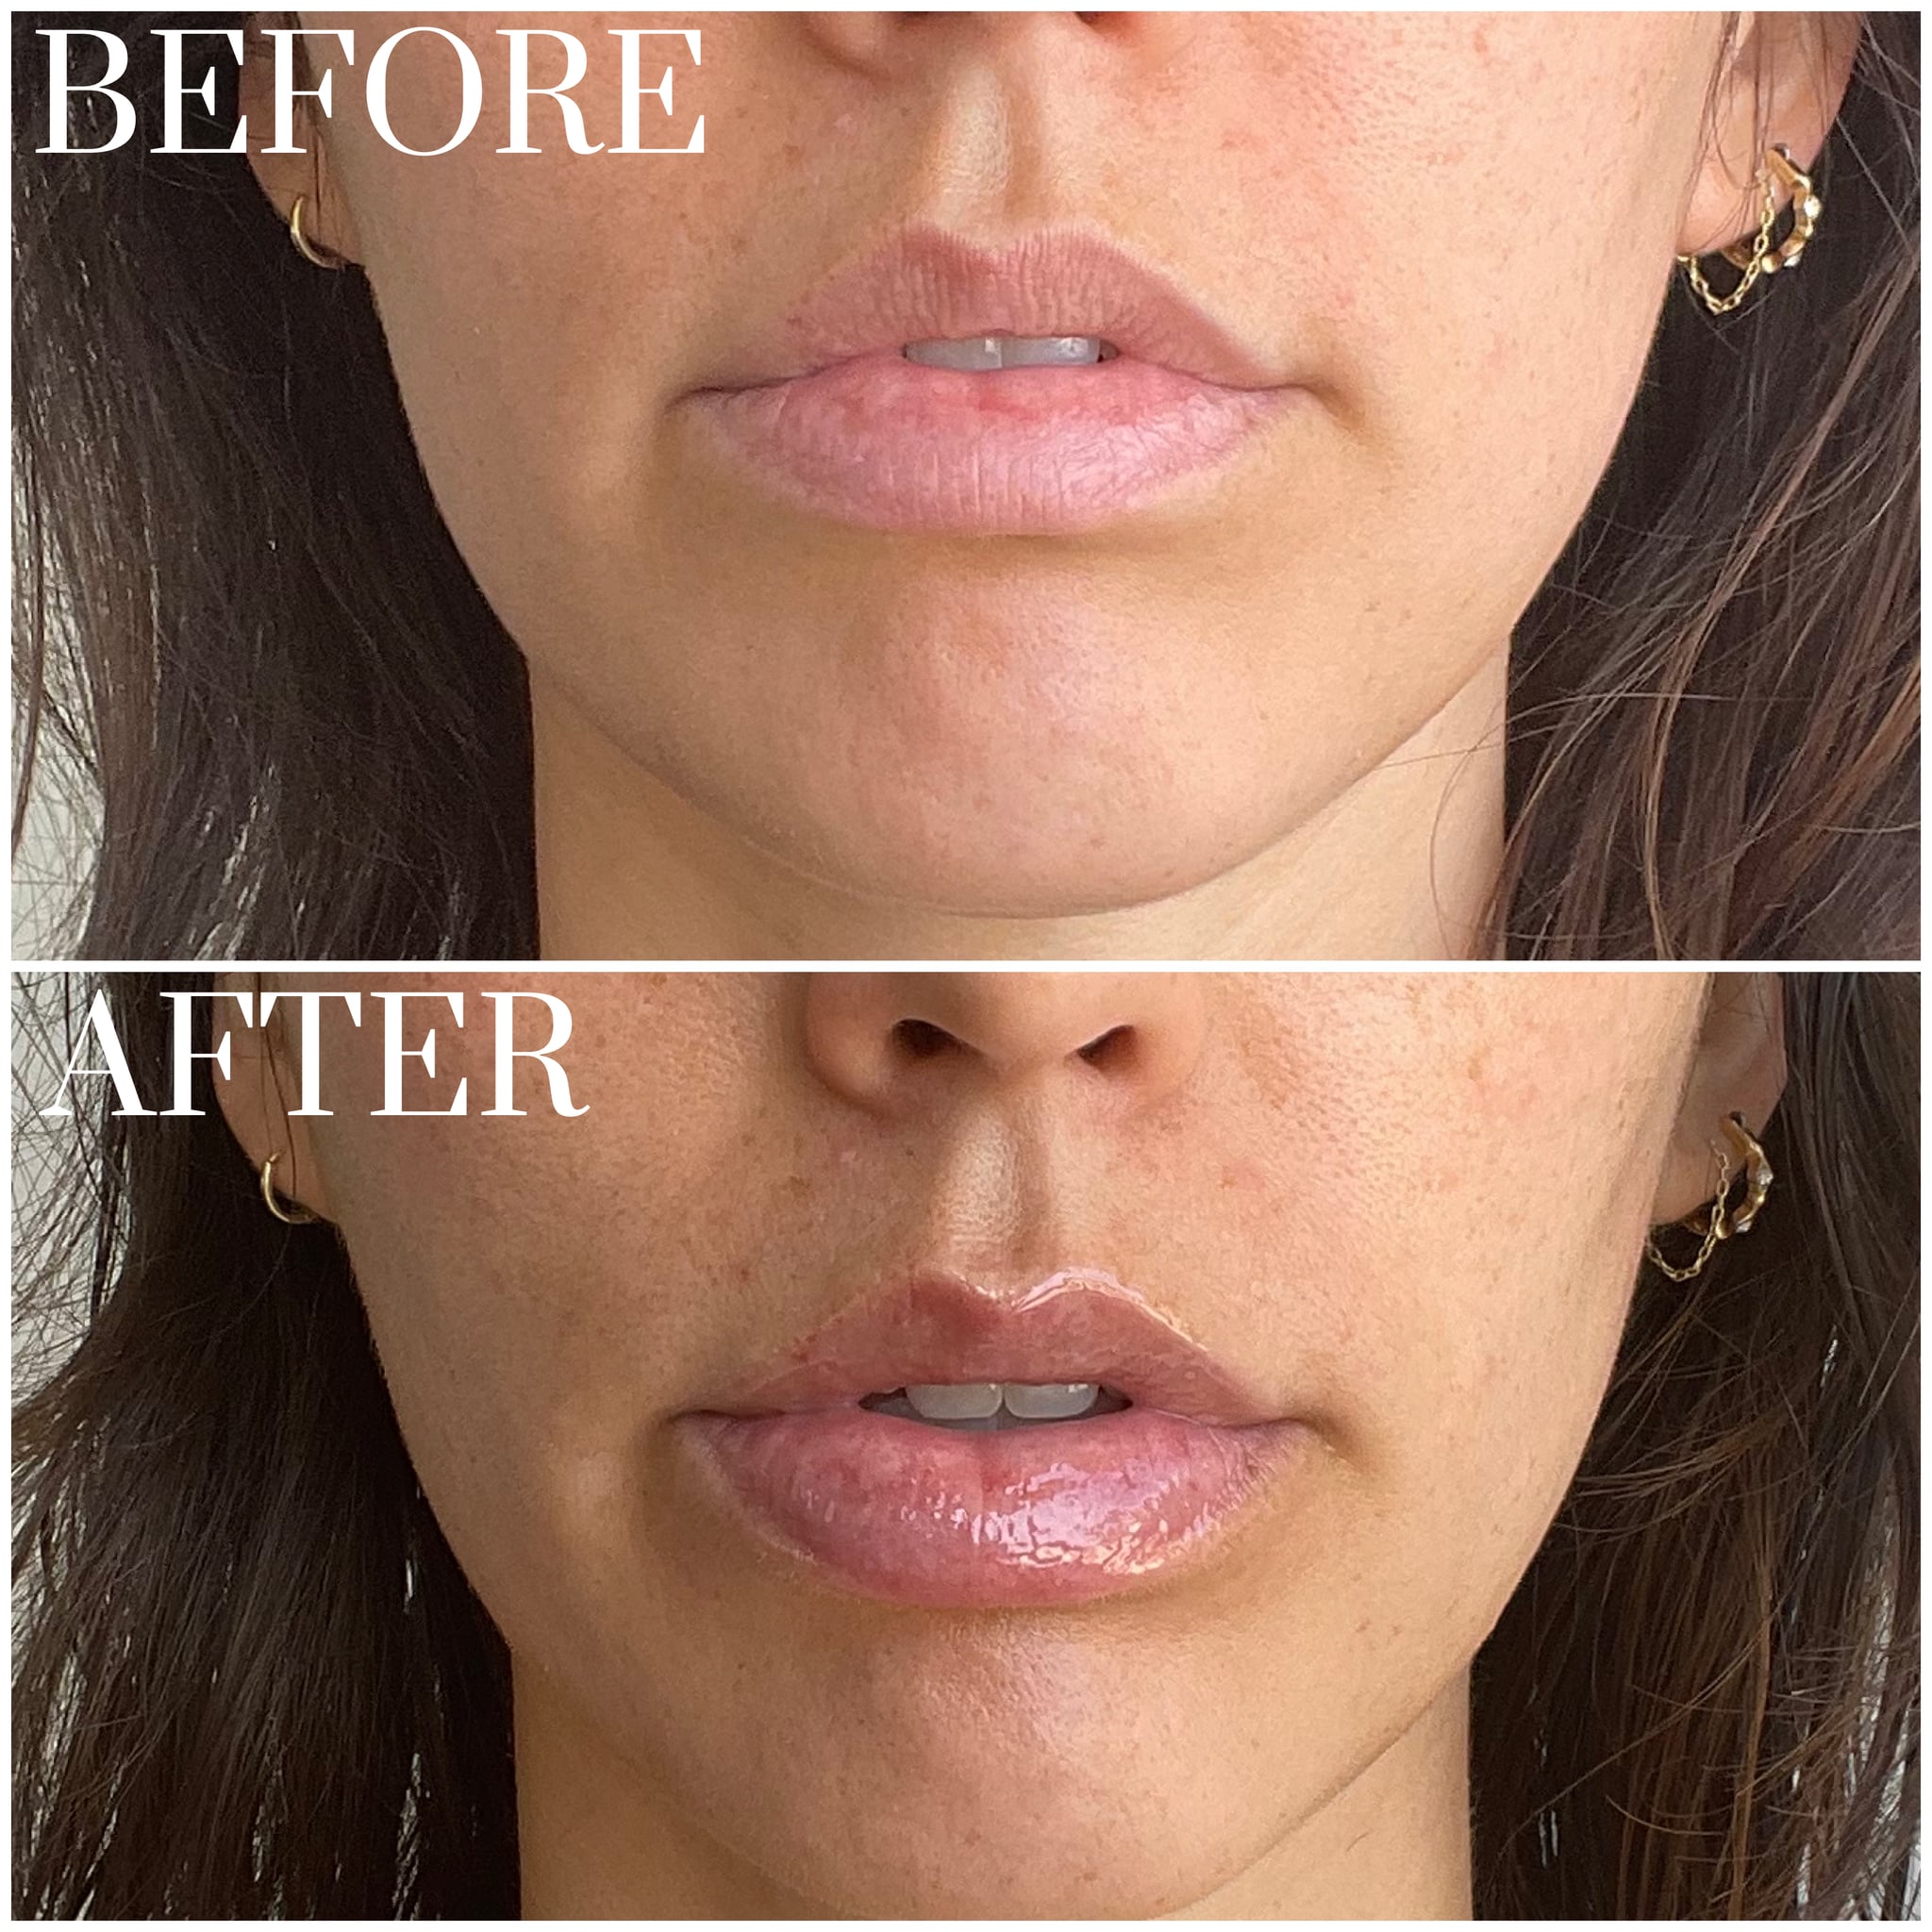 Rhode Peptide Lip Treatment Review With Photos | POPSUGAR Beauty